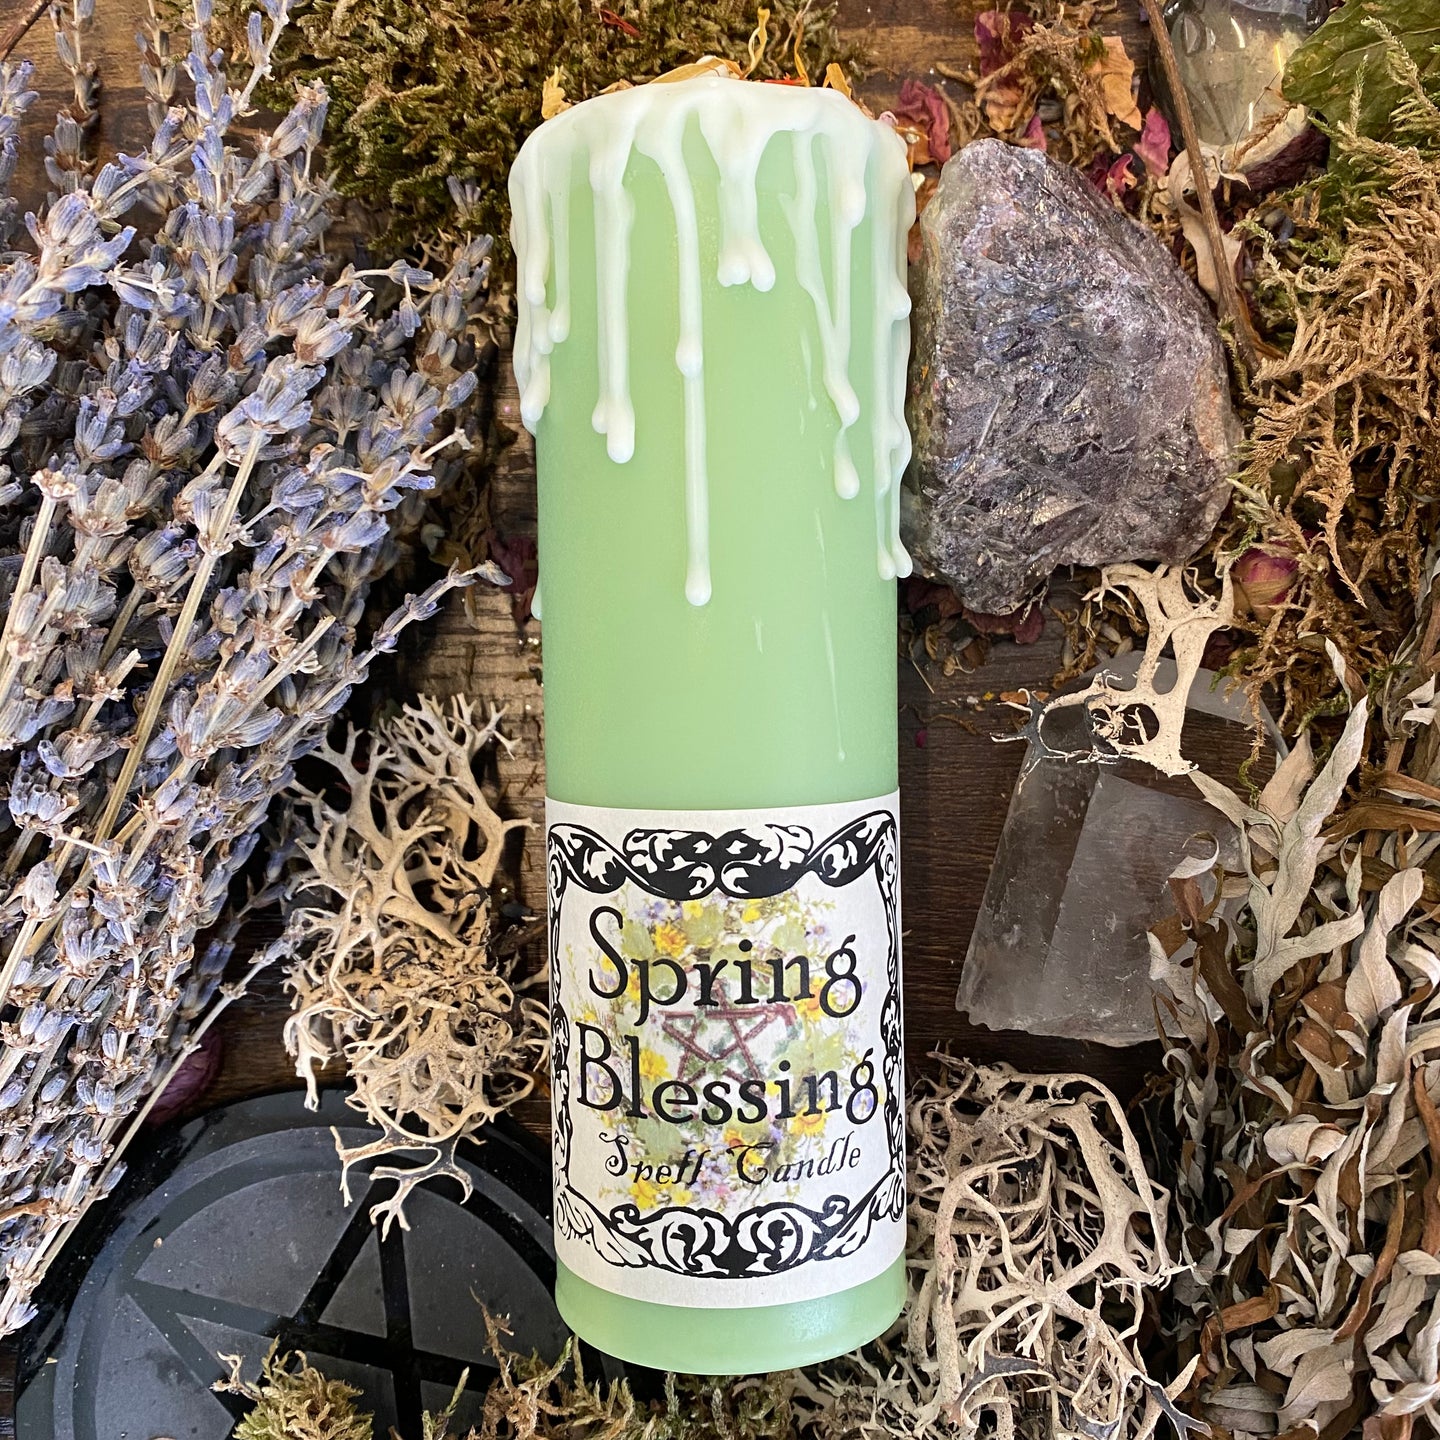 Spring Blessing Renewal & Inspiration Spell Candle